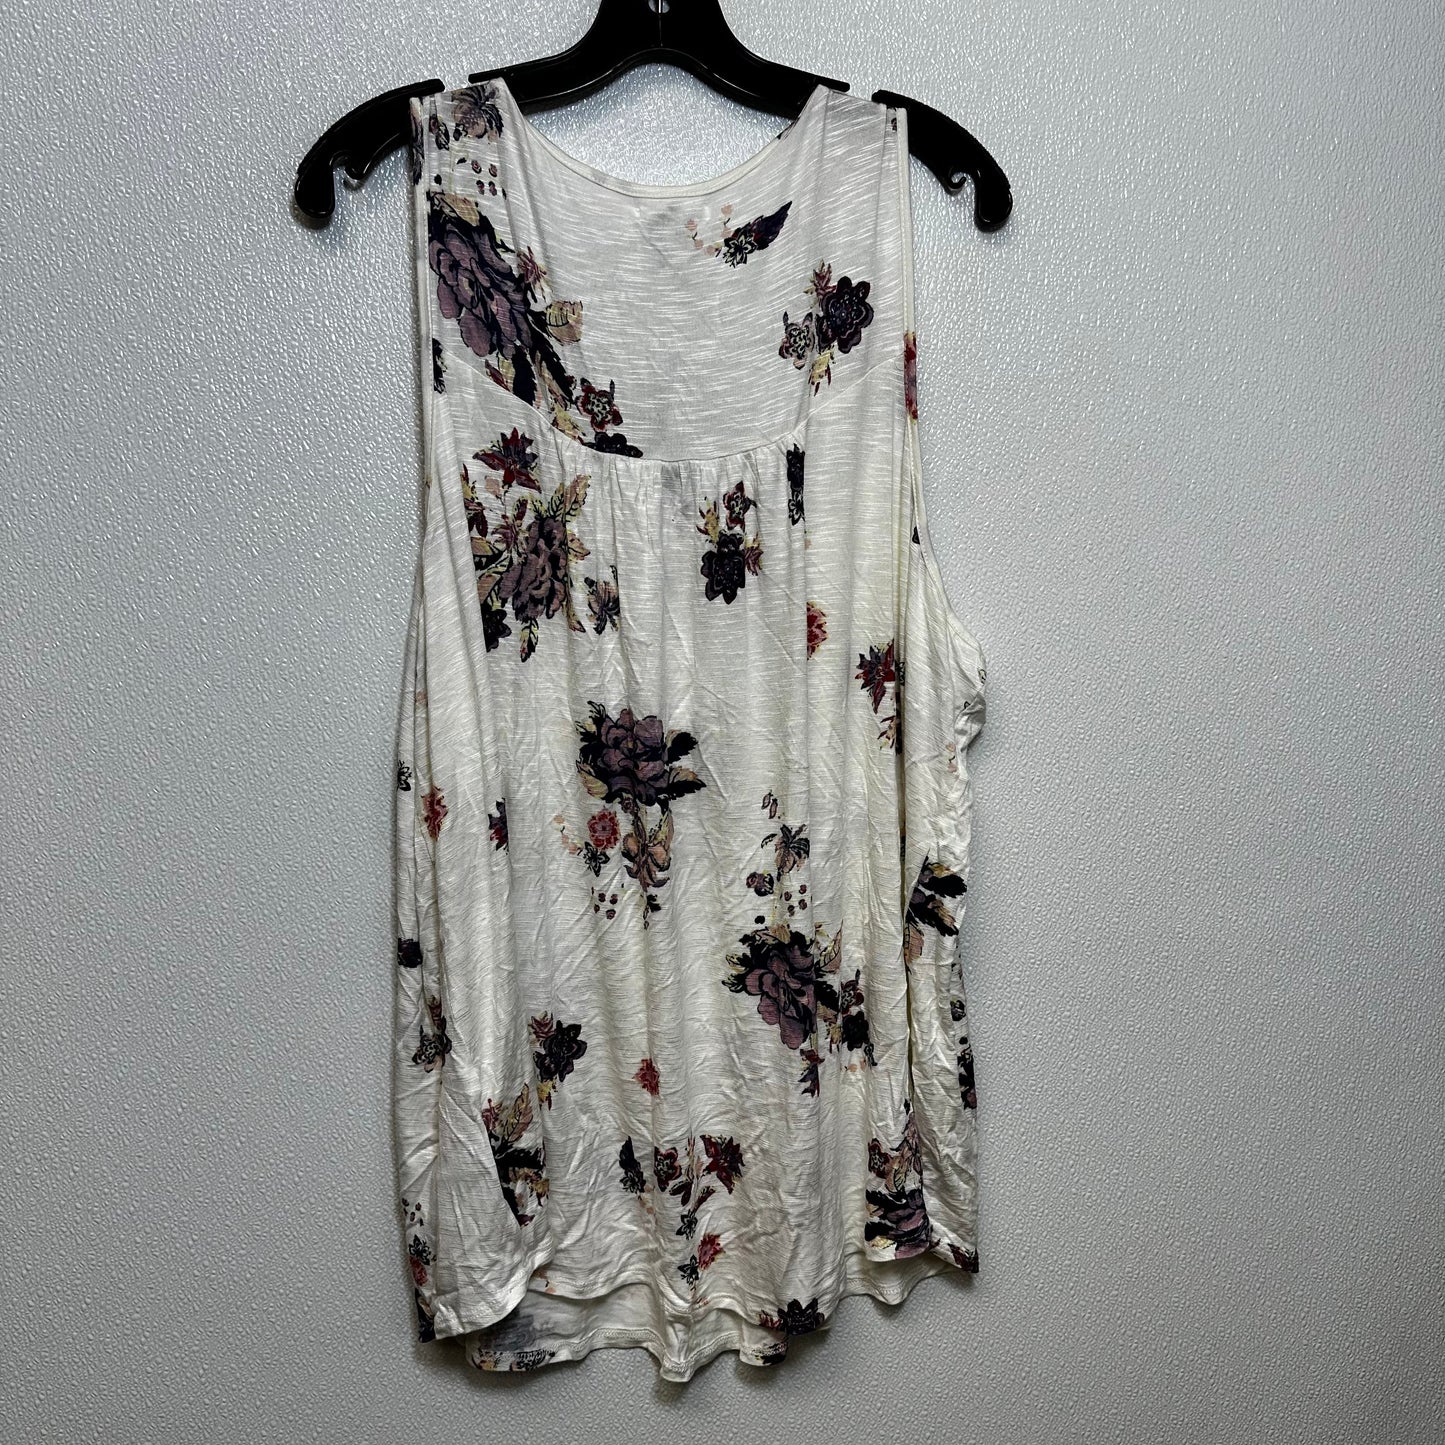 Floral Top Sleeveless Maurices O, Size 2x